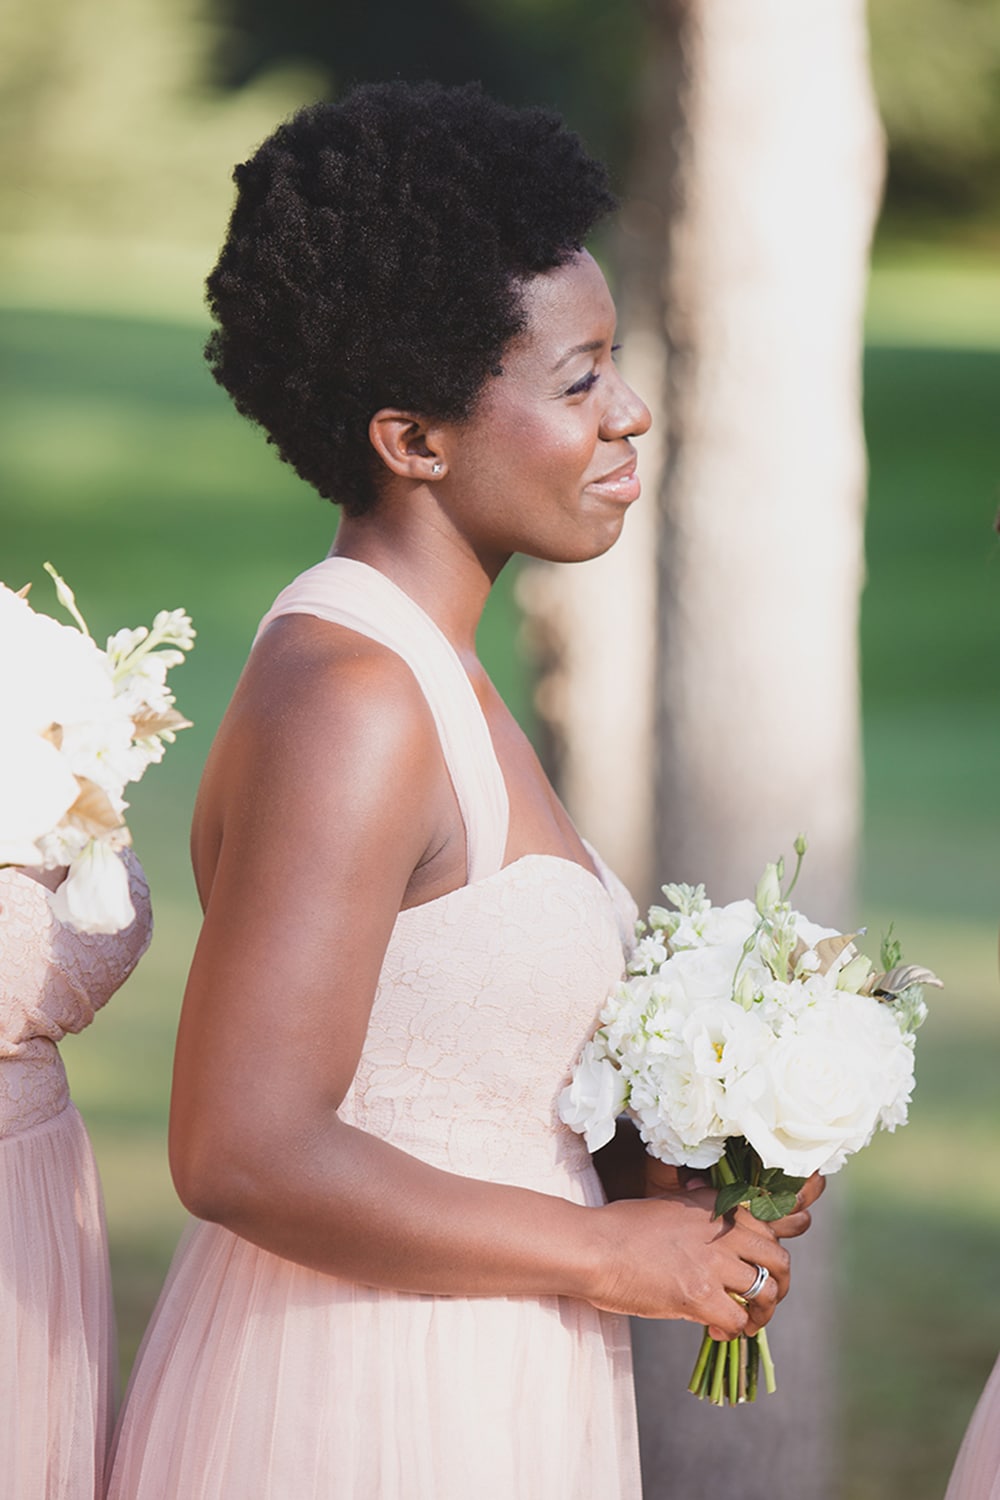 A documentary portrait of a bridesmaid watching the bride and groom during their wedding ceremony on Martha's Vineyard